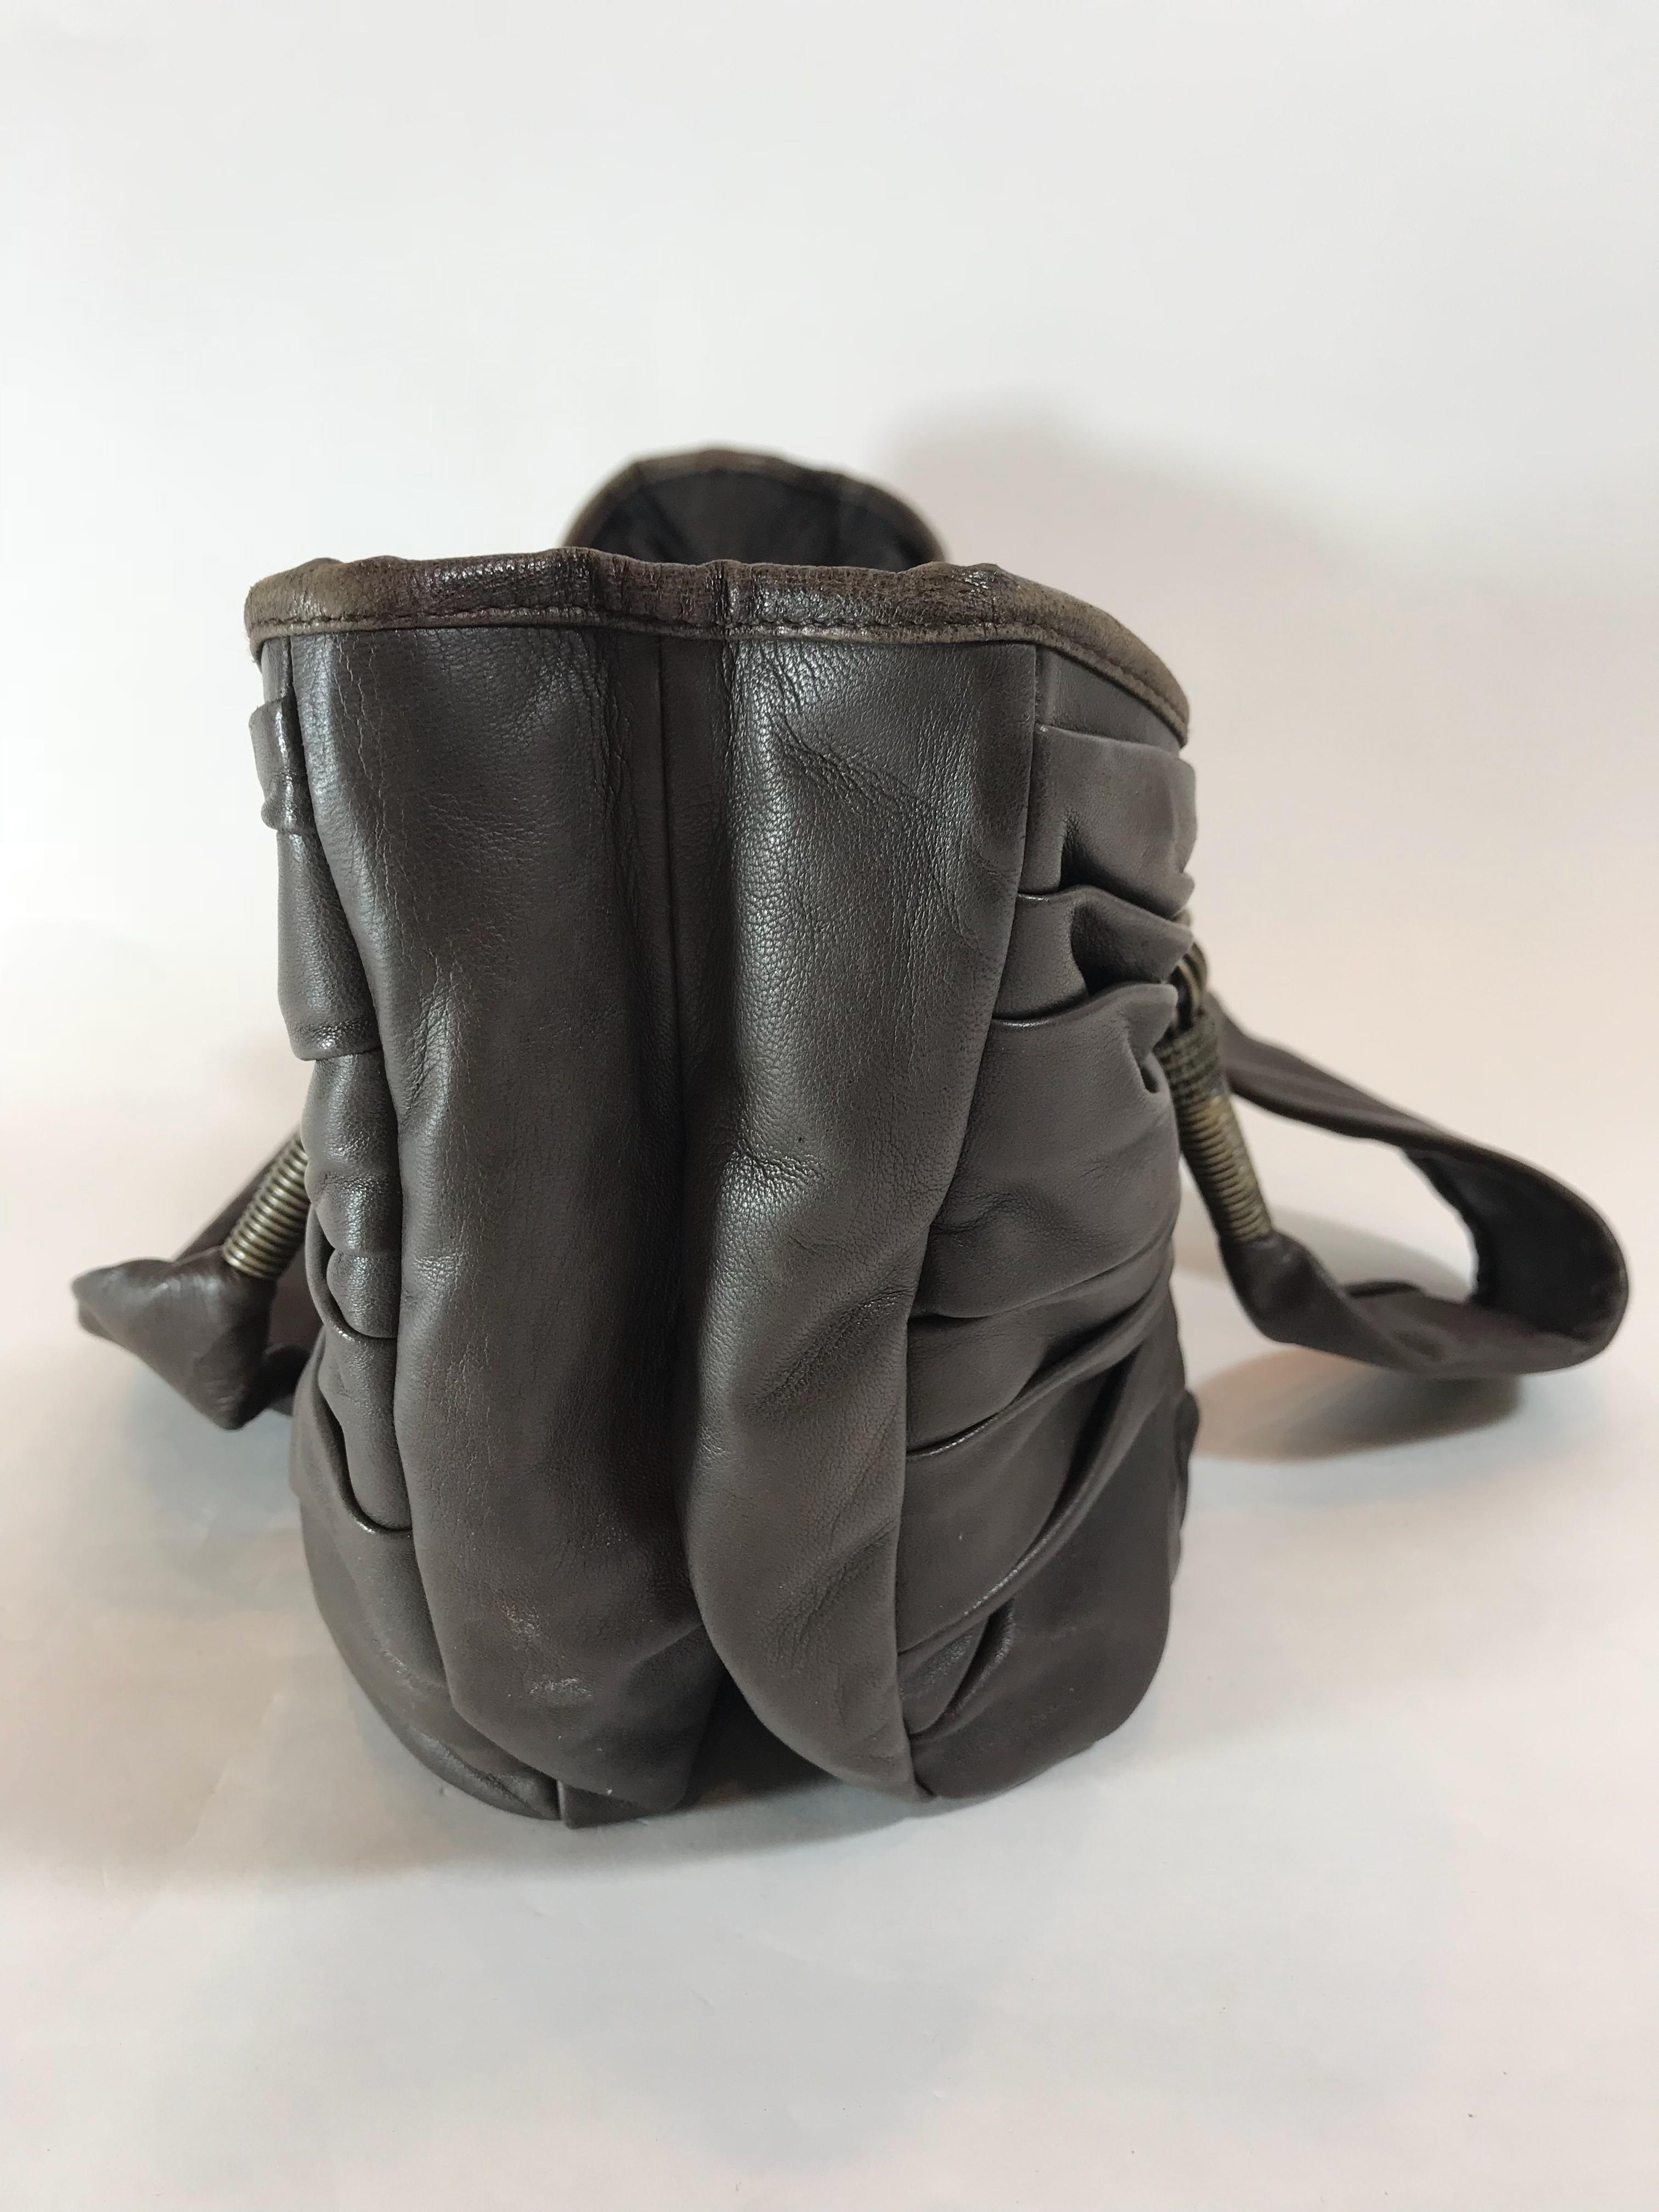 Brown pleated leather. Antiqued brass hardware. Magnetic snap closure. Dual flat shoulder straps. Tonal Diorissimo canvas lining. Dual compartments at interior, three pockets at interior wall one including a zippered closure.